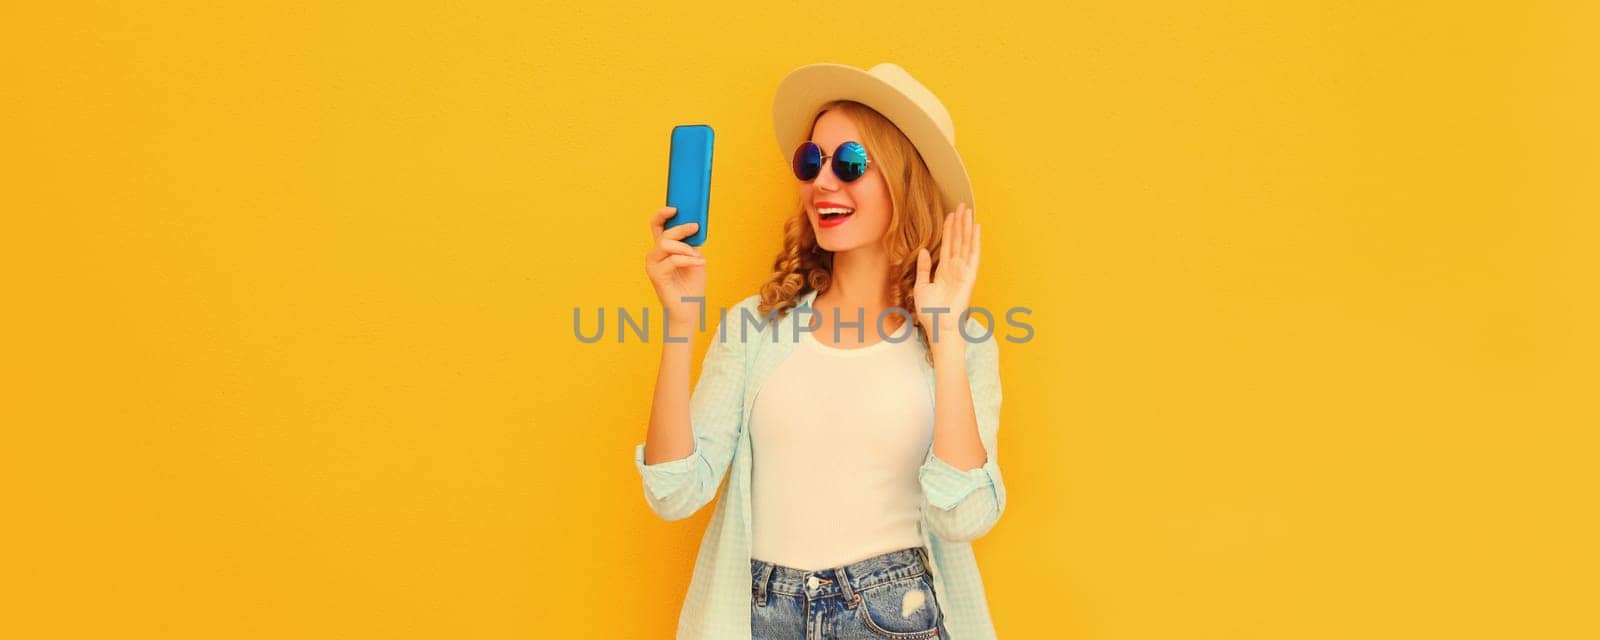 Portrait of happy joyful laughing young woman taking selfie with smartphone or talking on video call waving hand wearing summer straw hat on bright yellow background